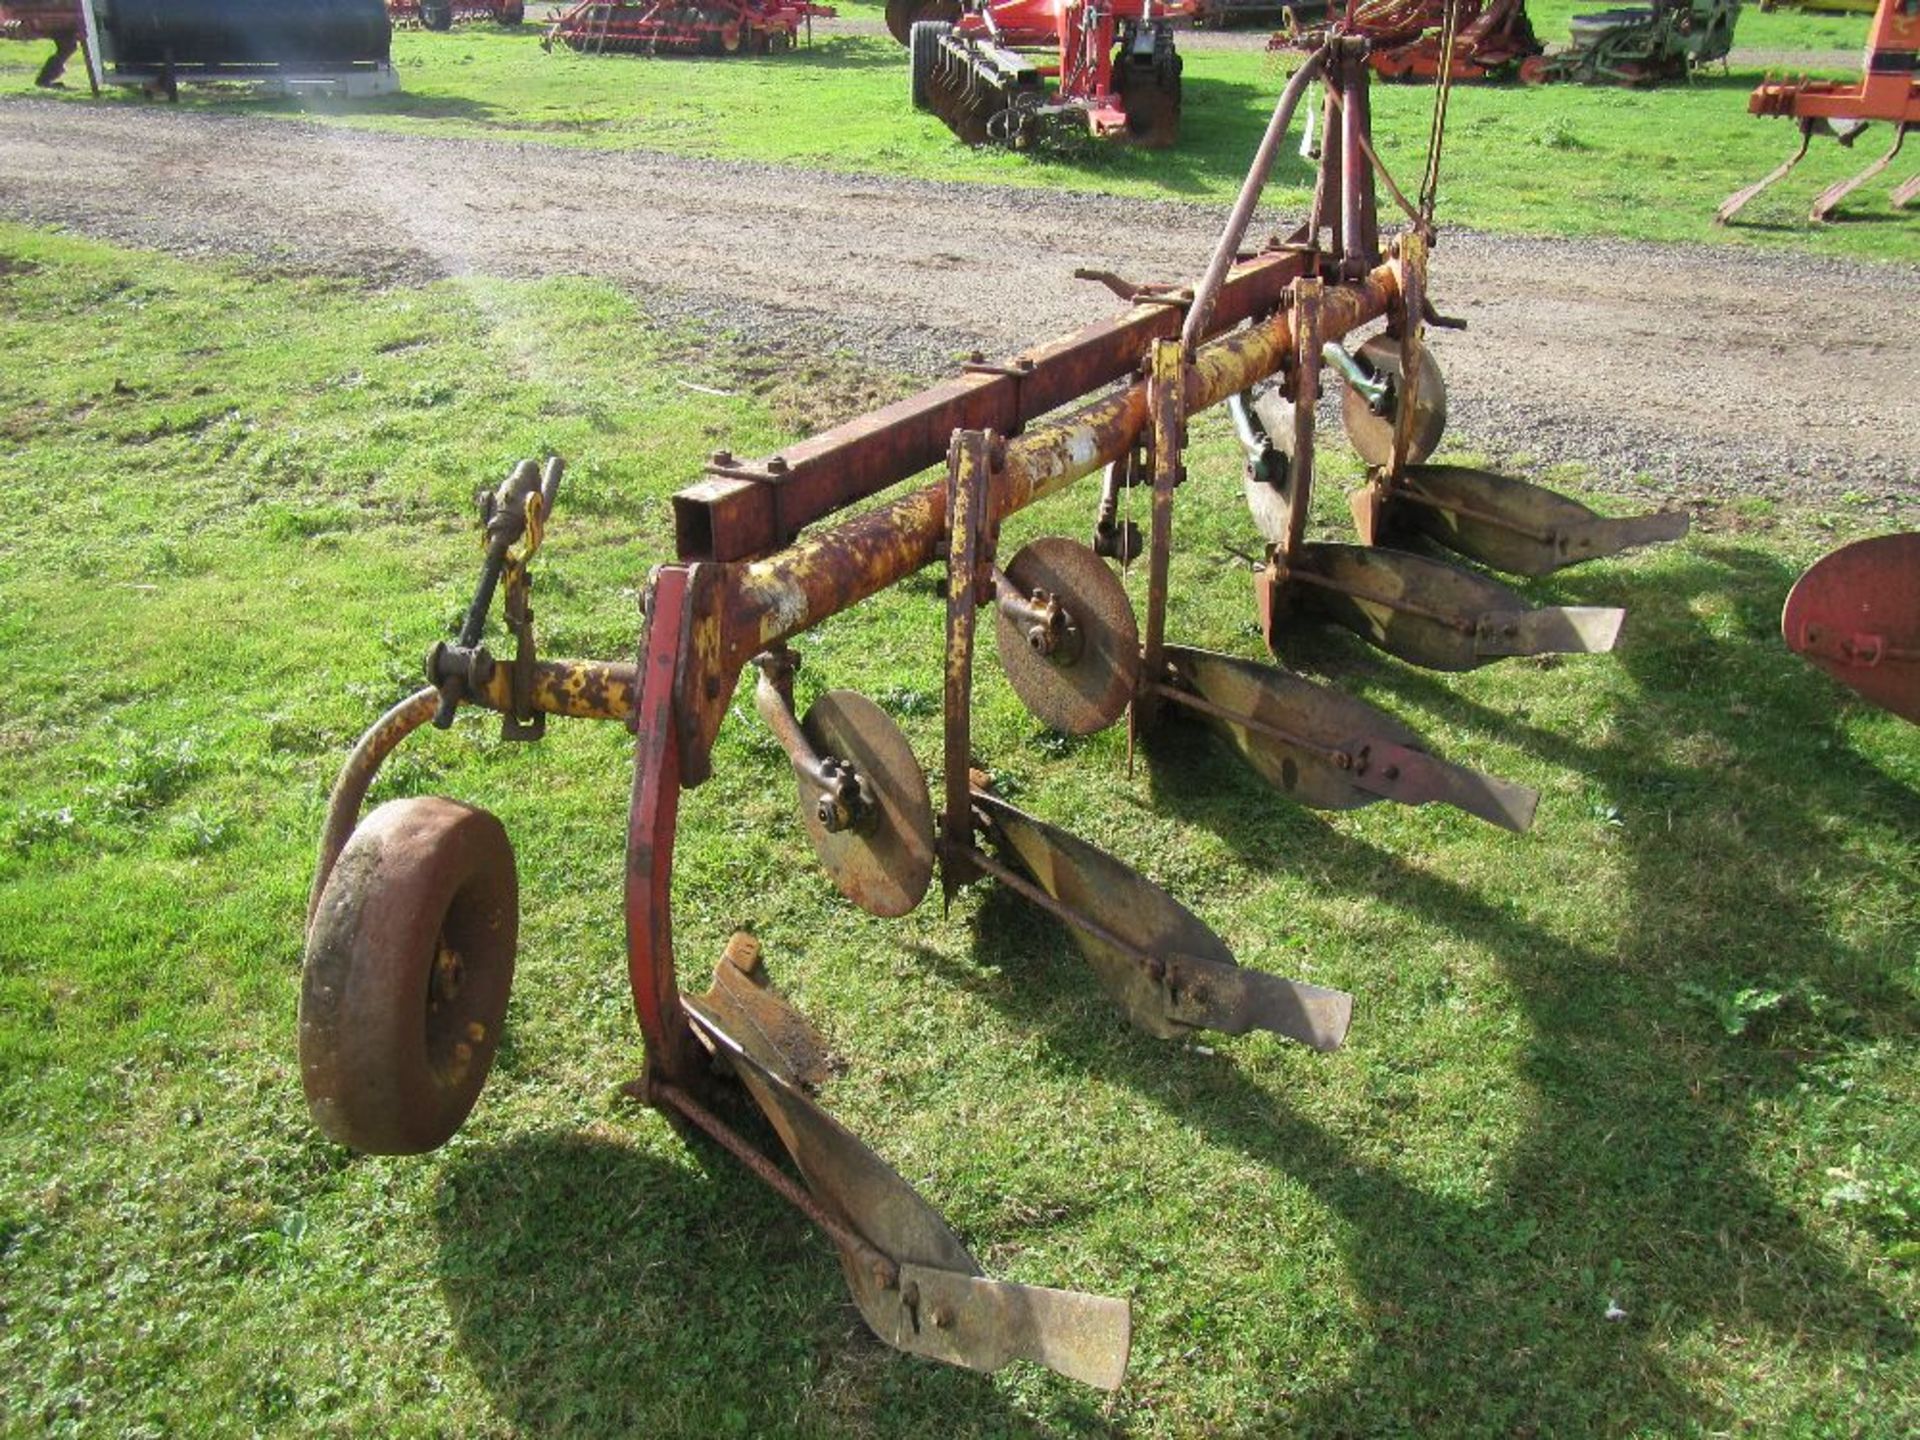 Bomford 5 Furrow Plough with Discs & Land Wheel - Image 2 of 4